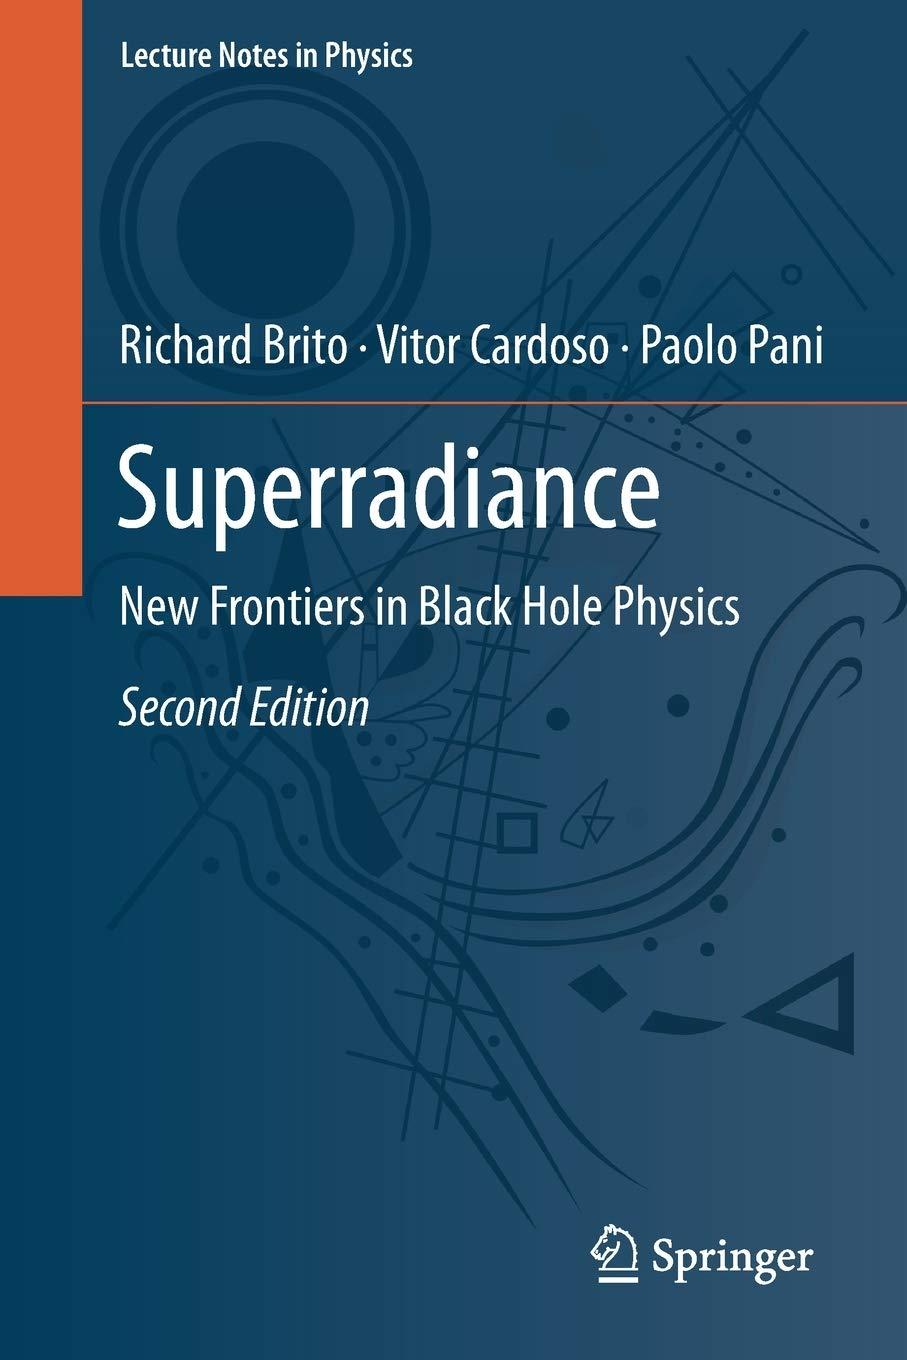 superradiance new frontiers in black hole physics 2nd edition richard brito, vitor cardoso, paolo pani